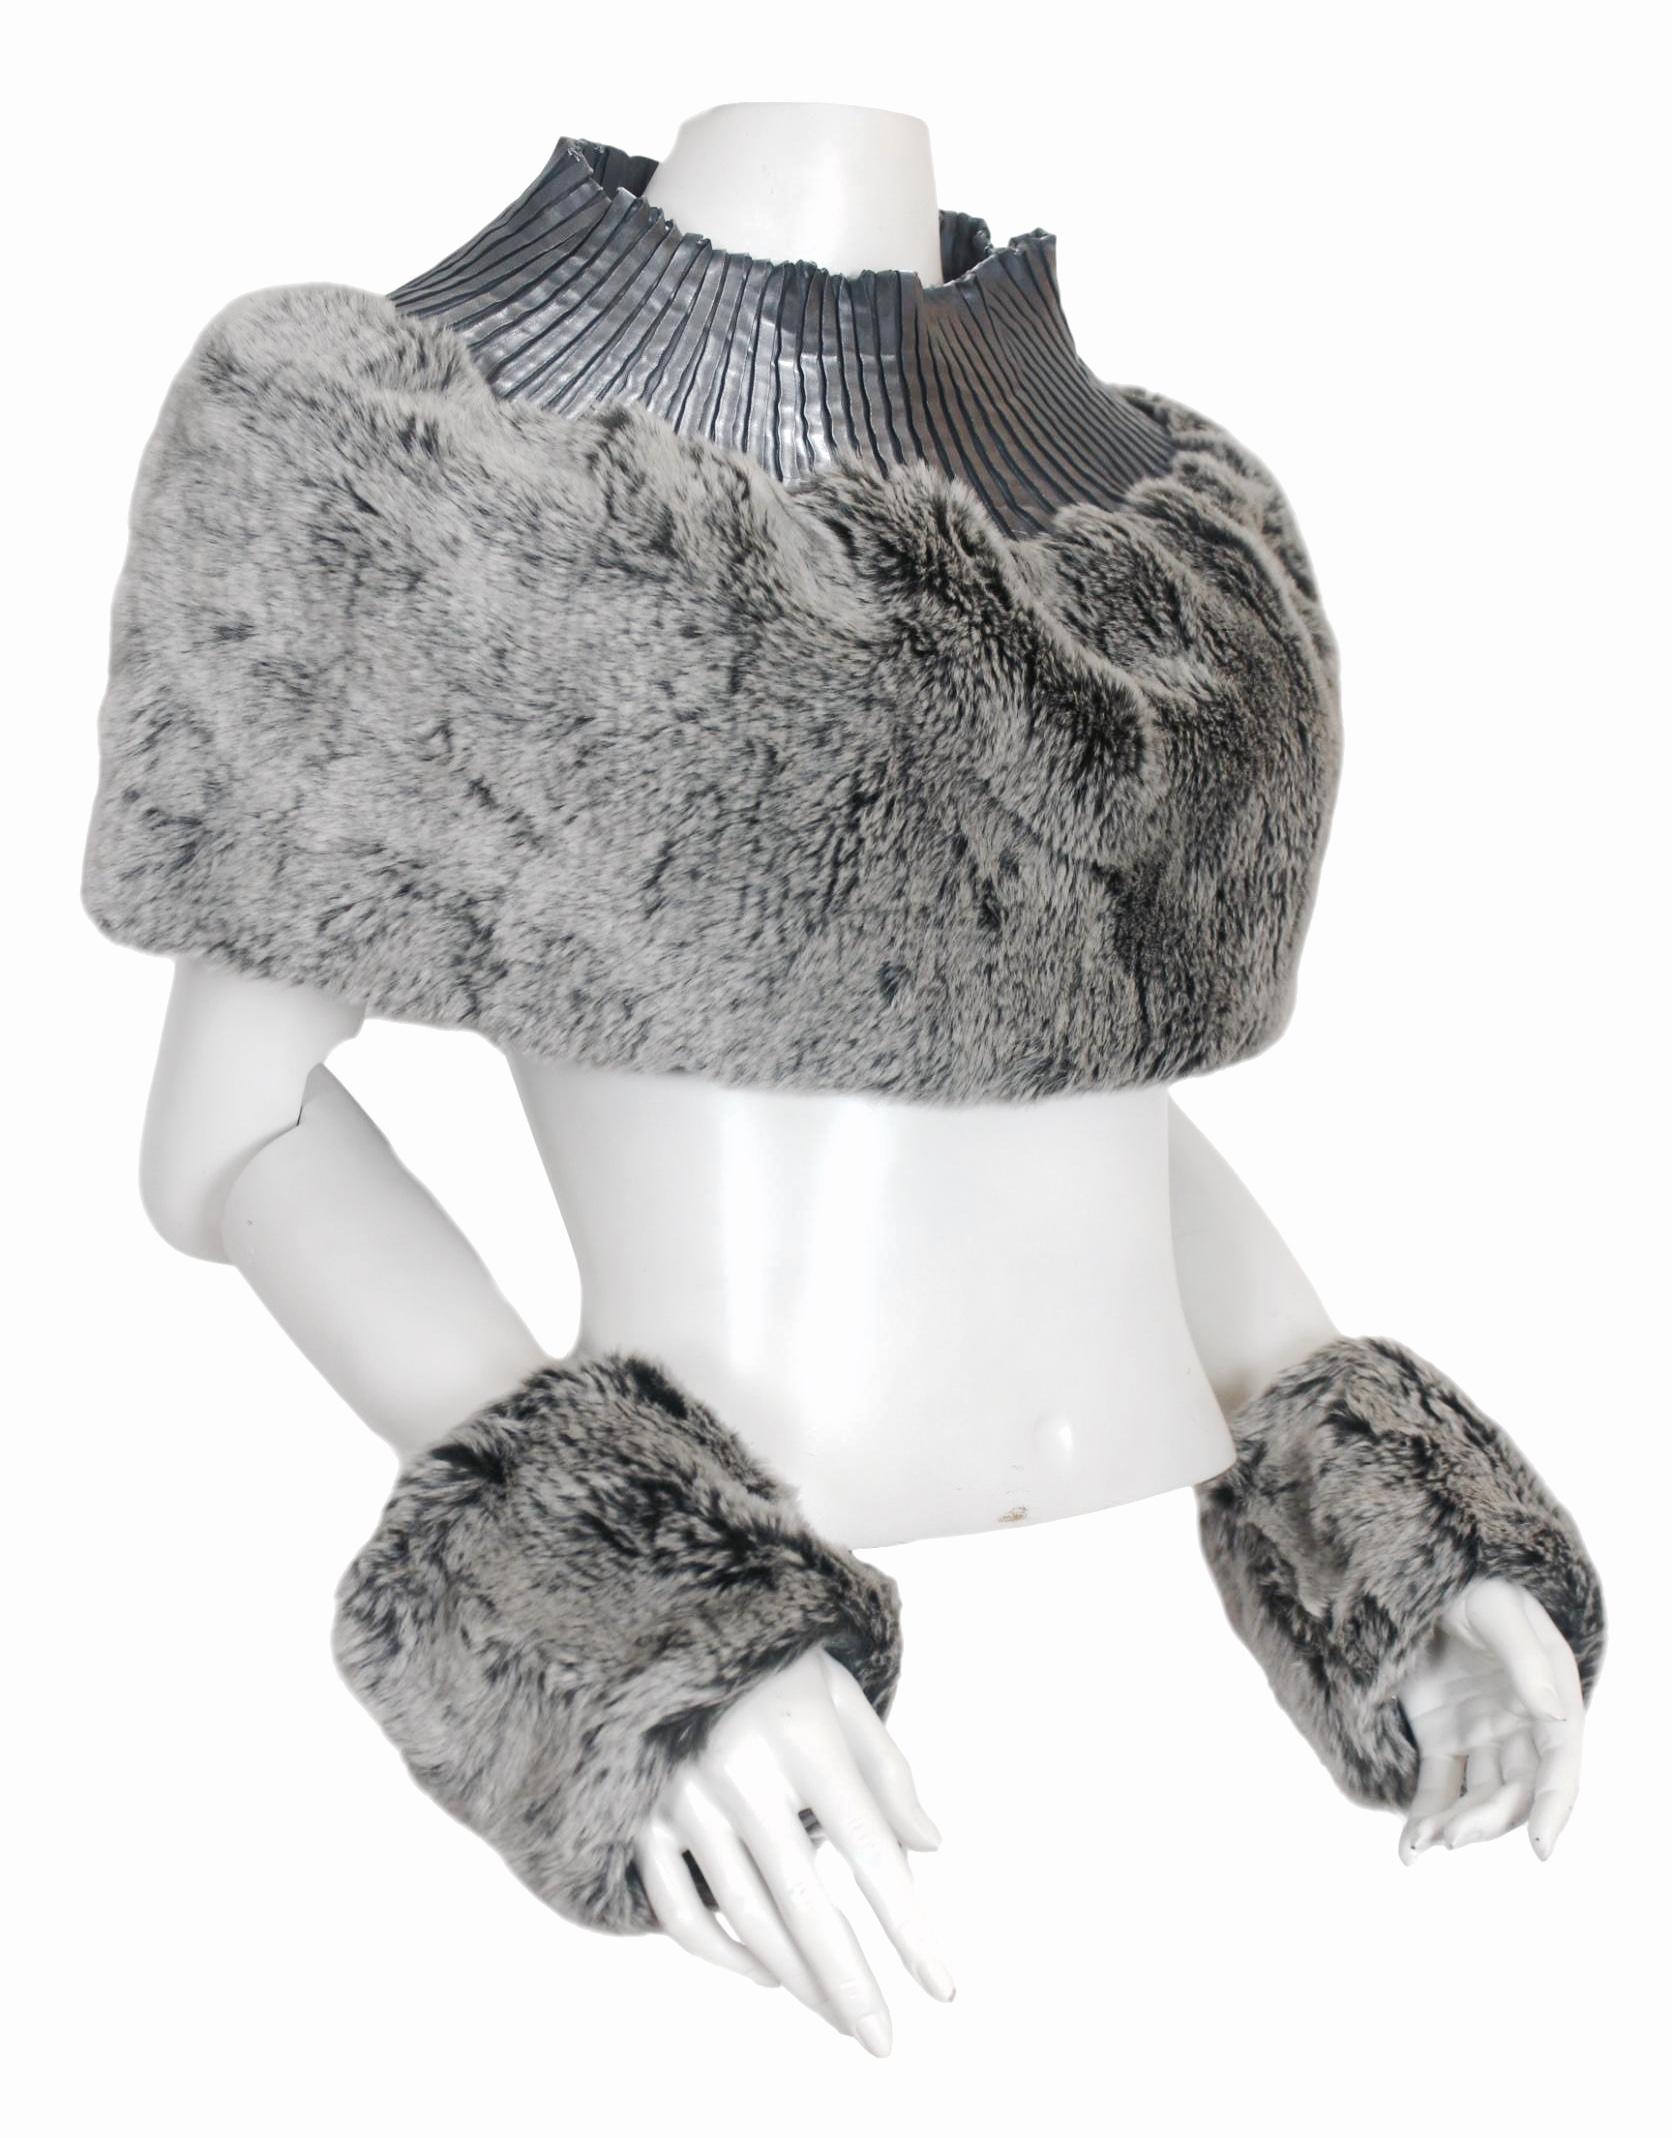 Issey Miyake Accessories
Pleats Please 
Faux Fur Shoulder Cowl and Wrist Cuffs
No size